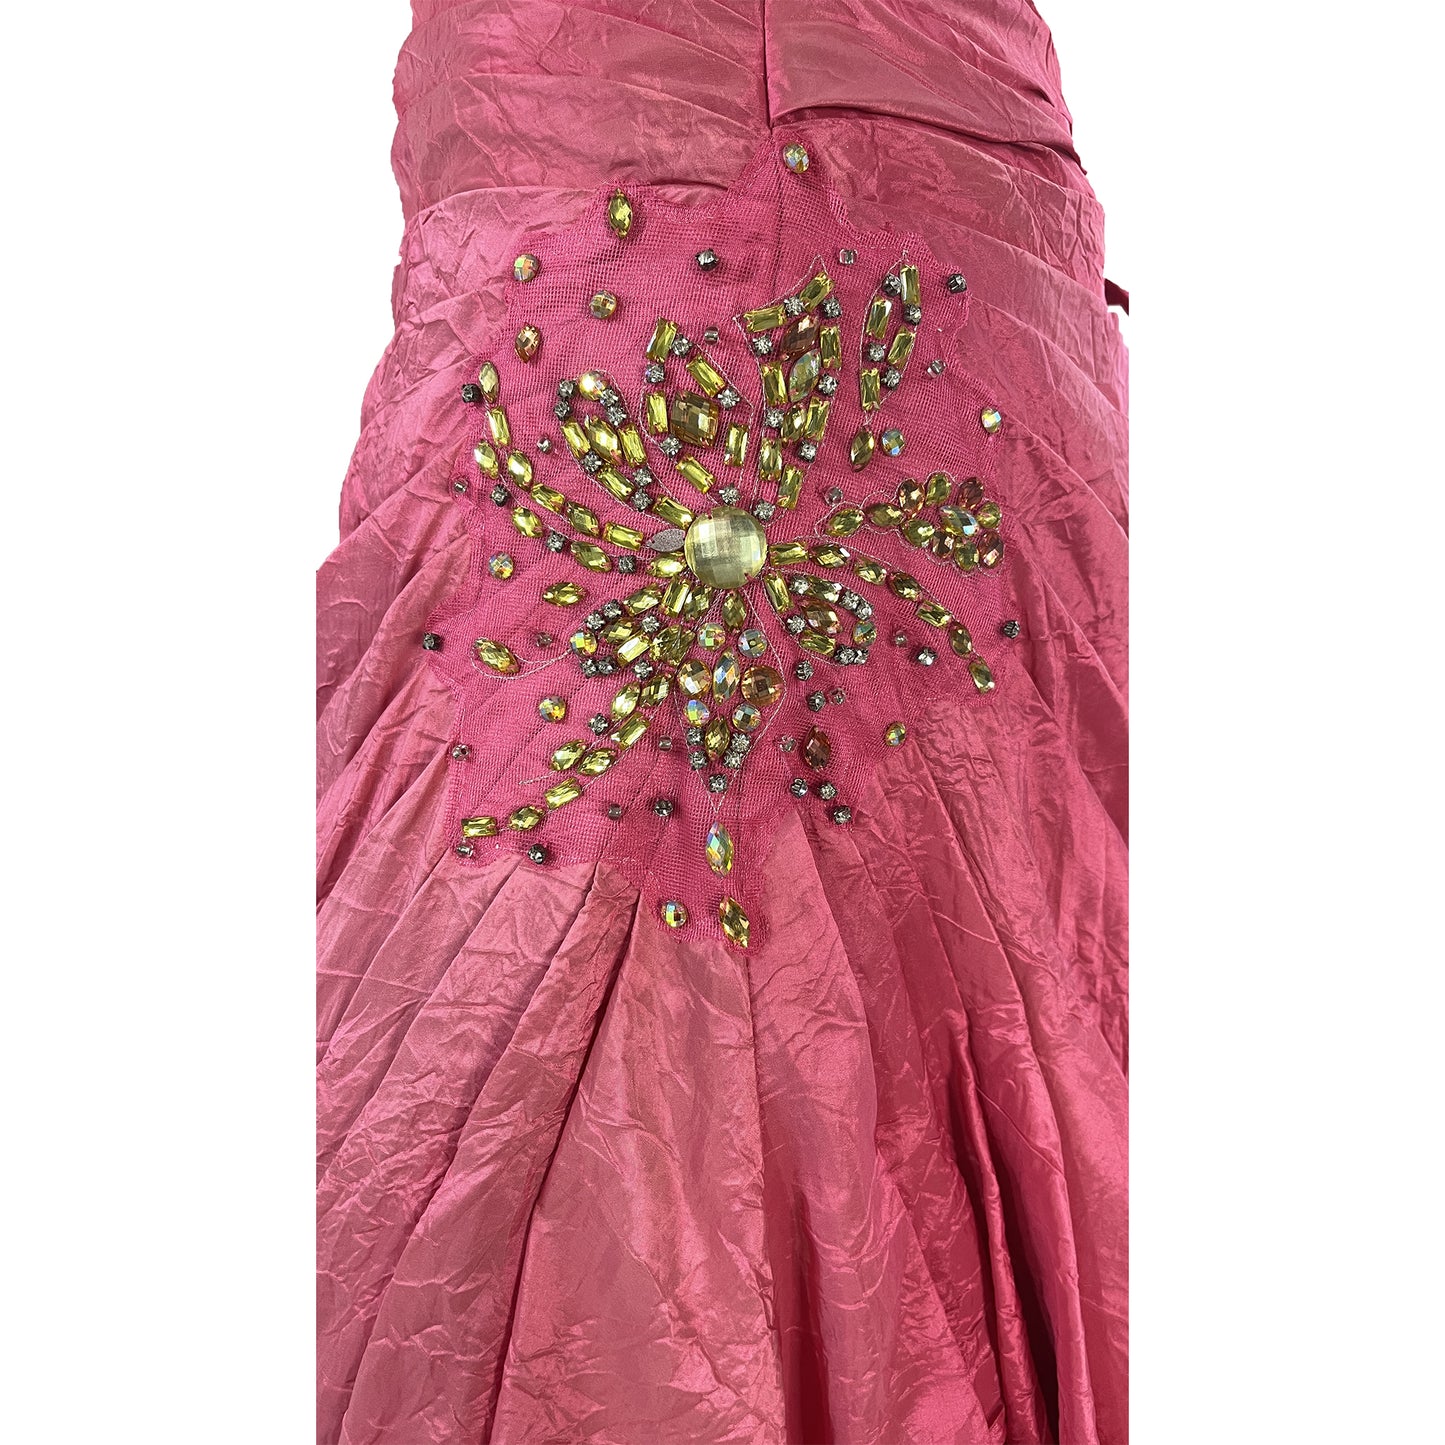 B'Dazzle Ball Gown One-Shoulder Lace-Up Embellished Pink Size 8 SKU 000404-1